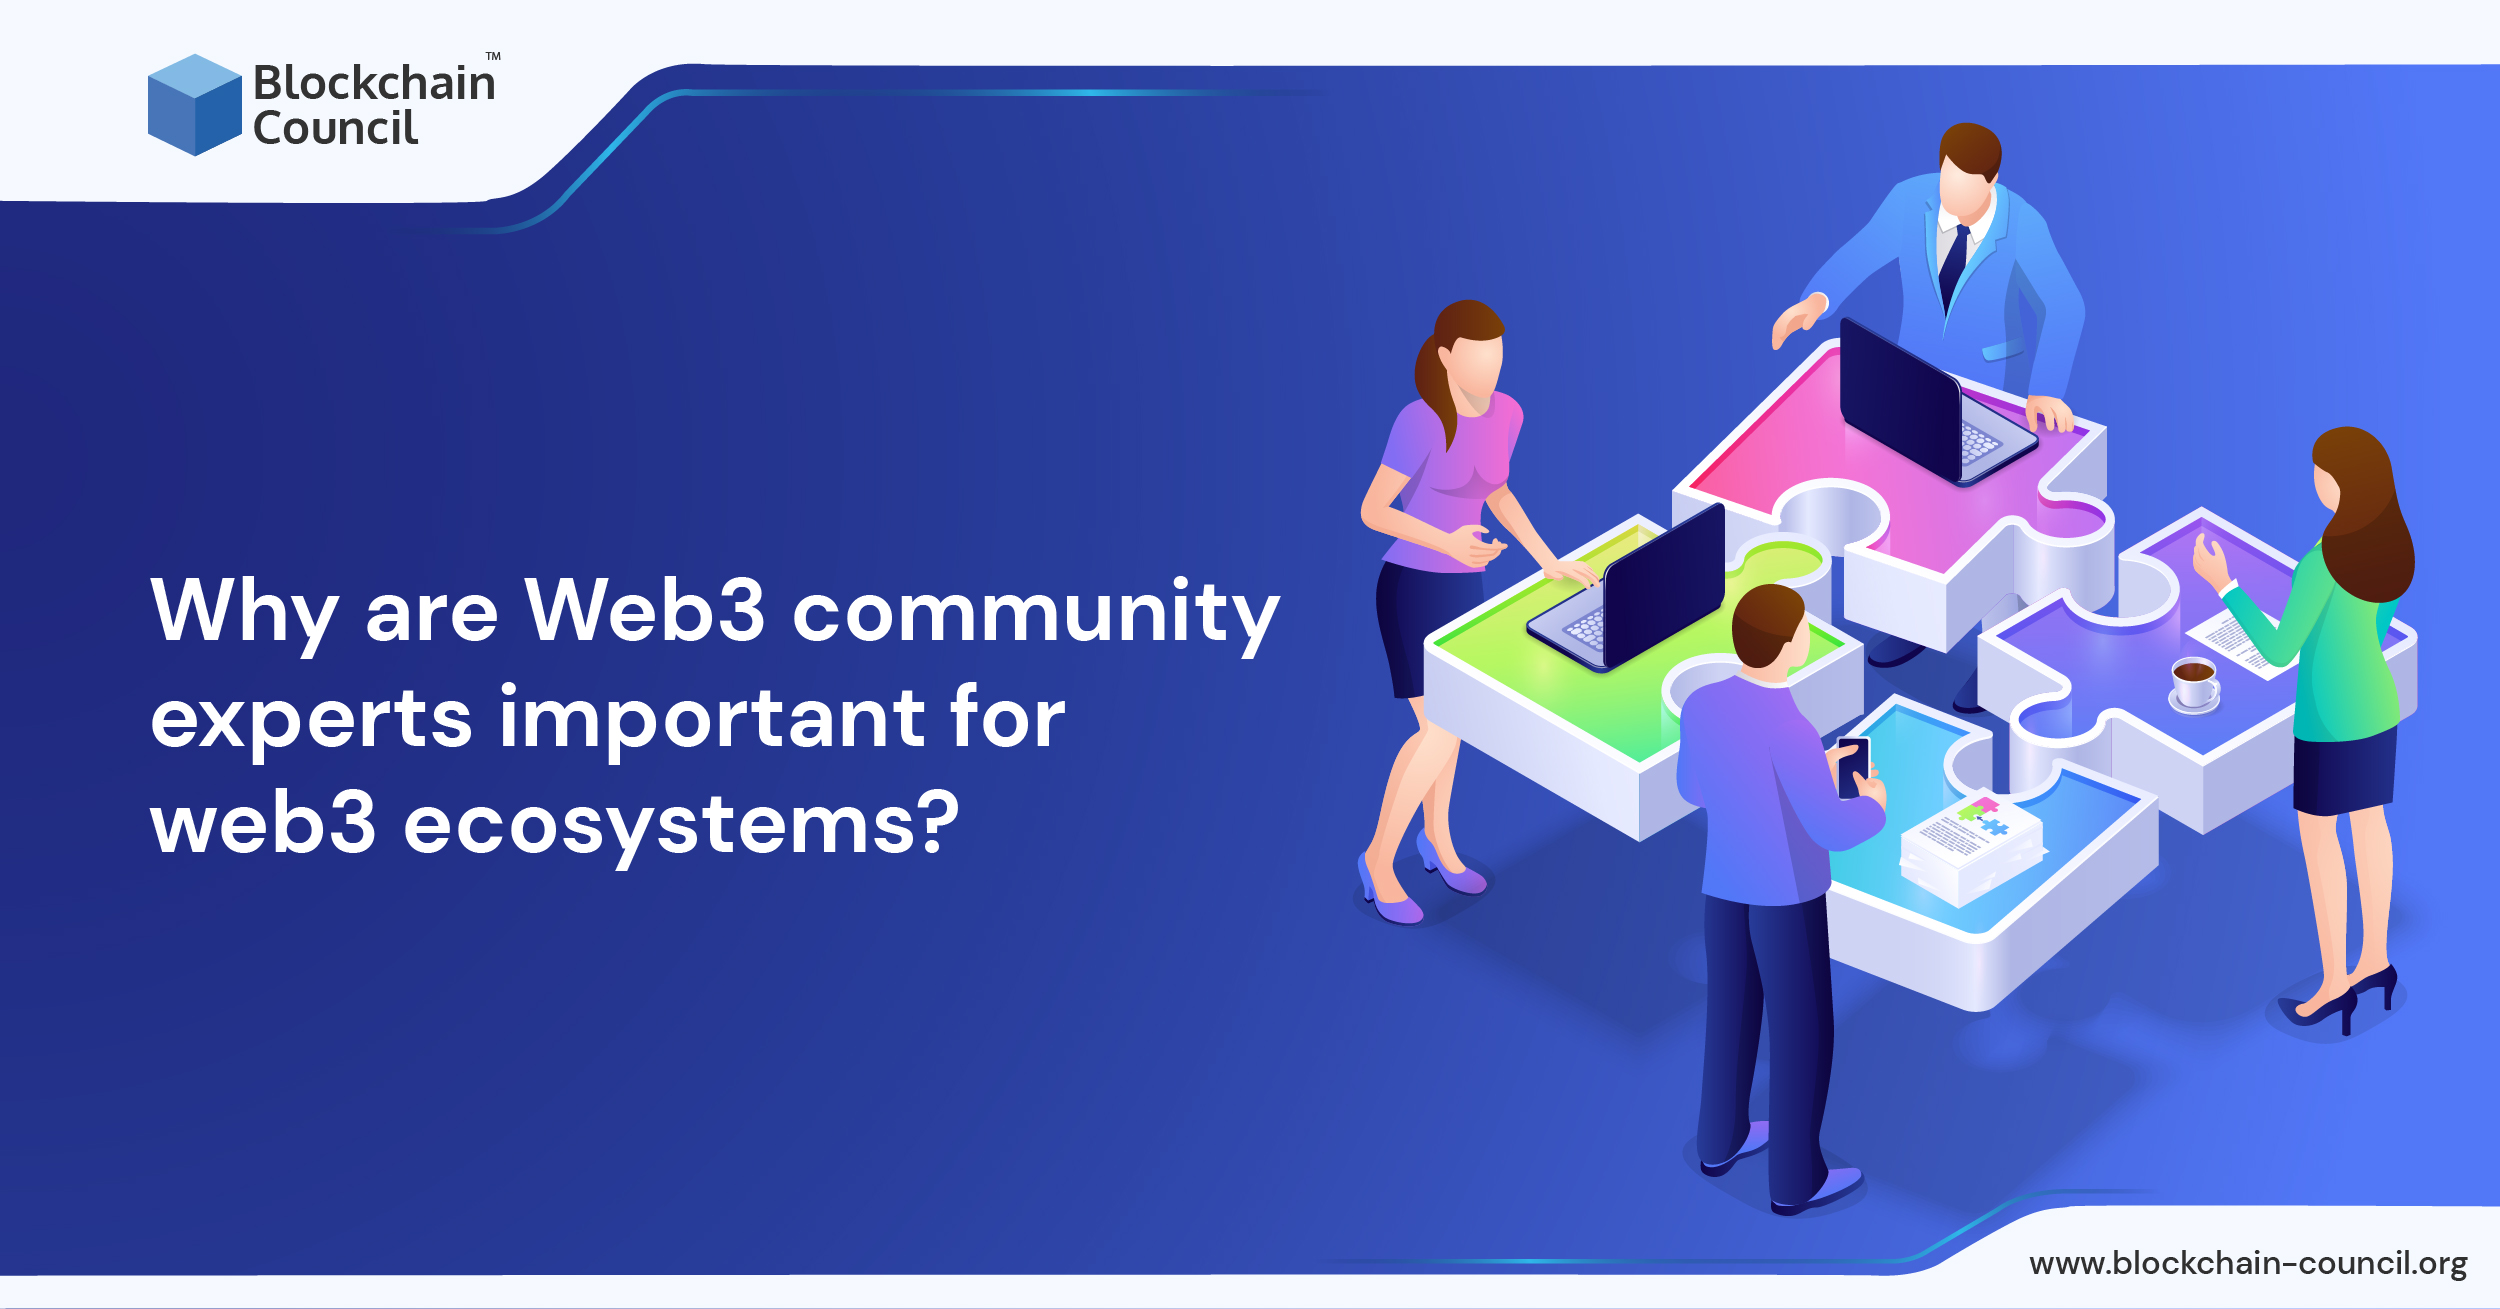 Why are Web3 community experts important for web3 ecosystems